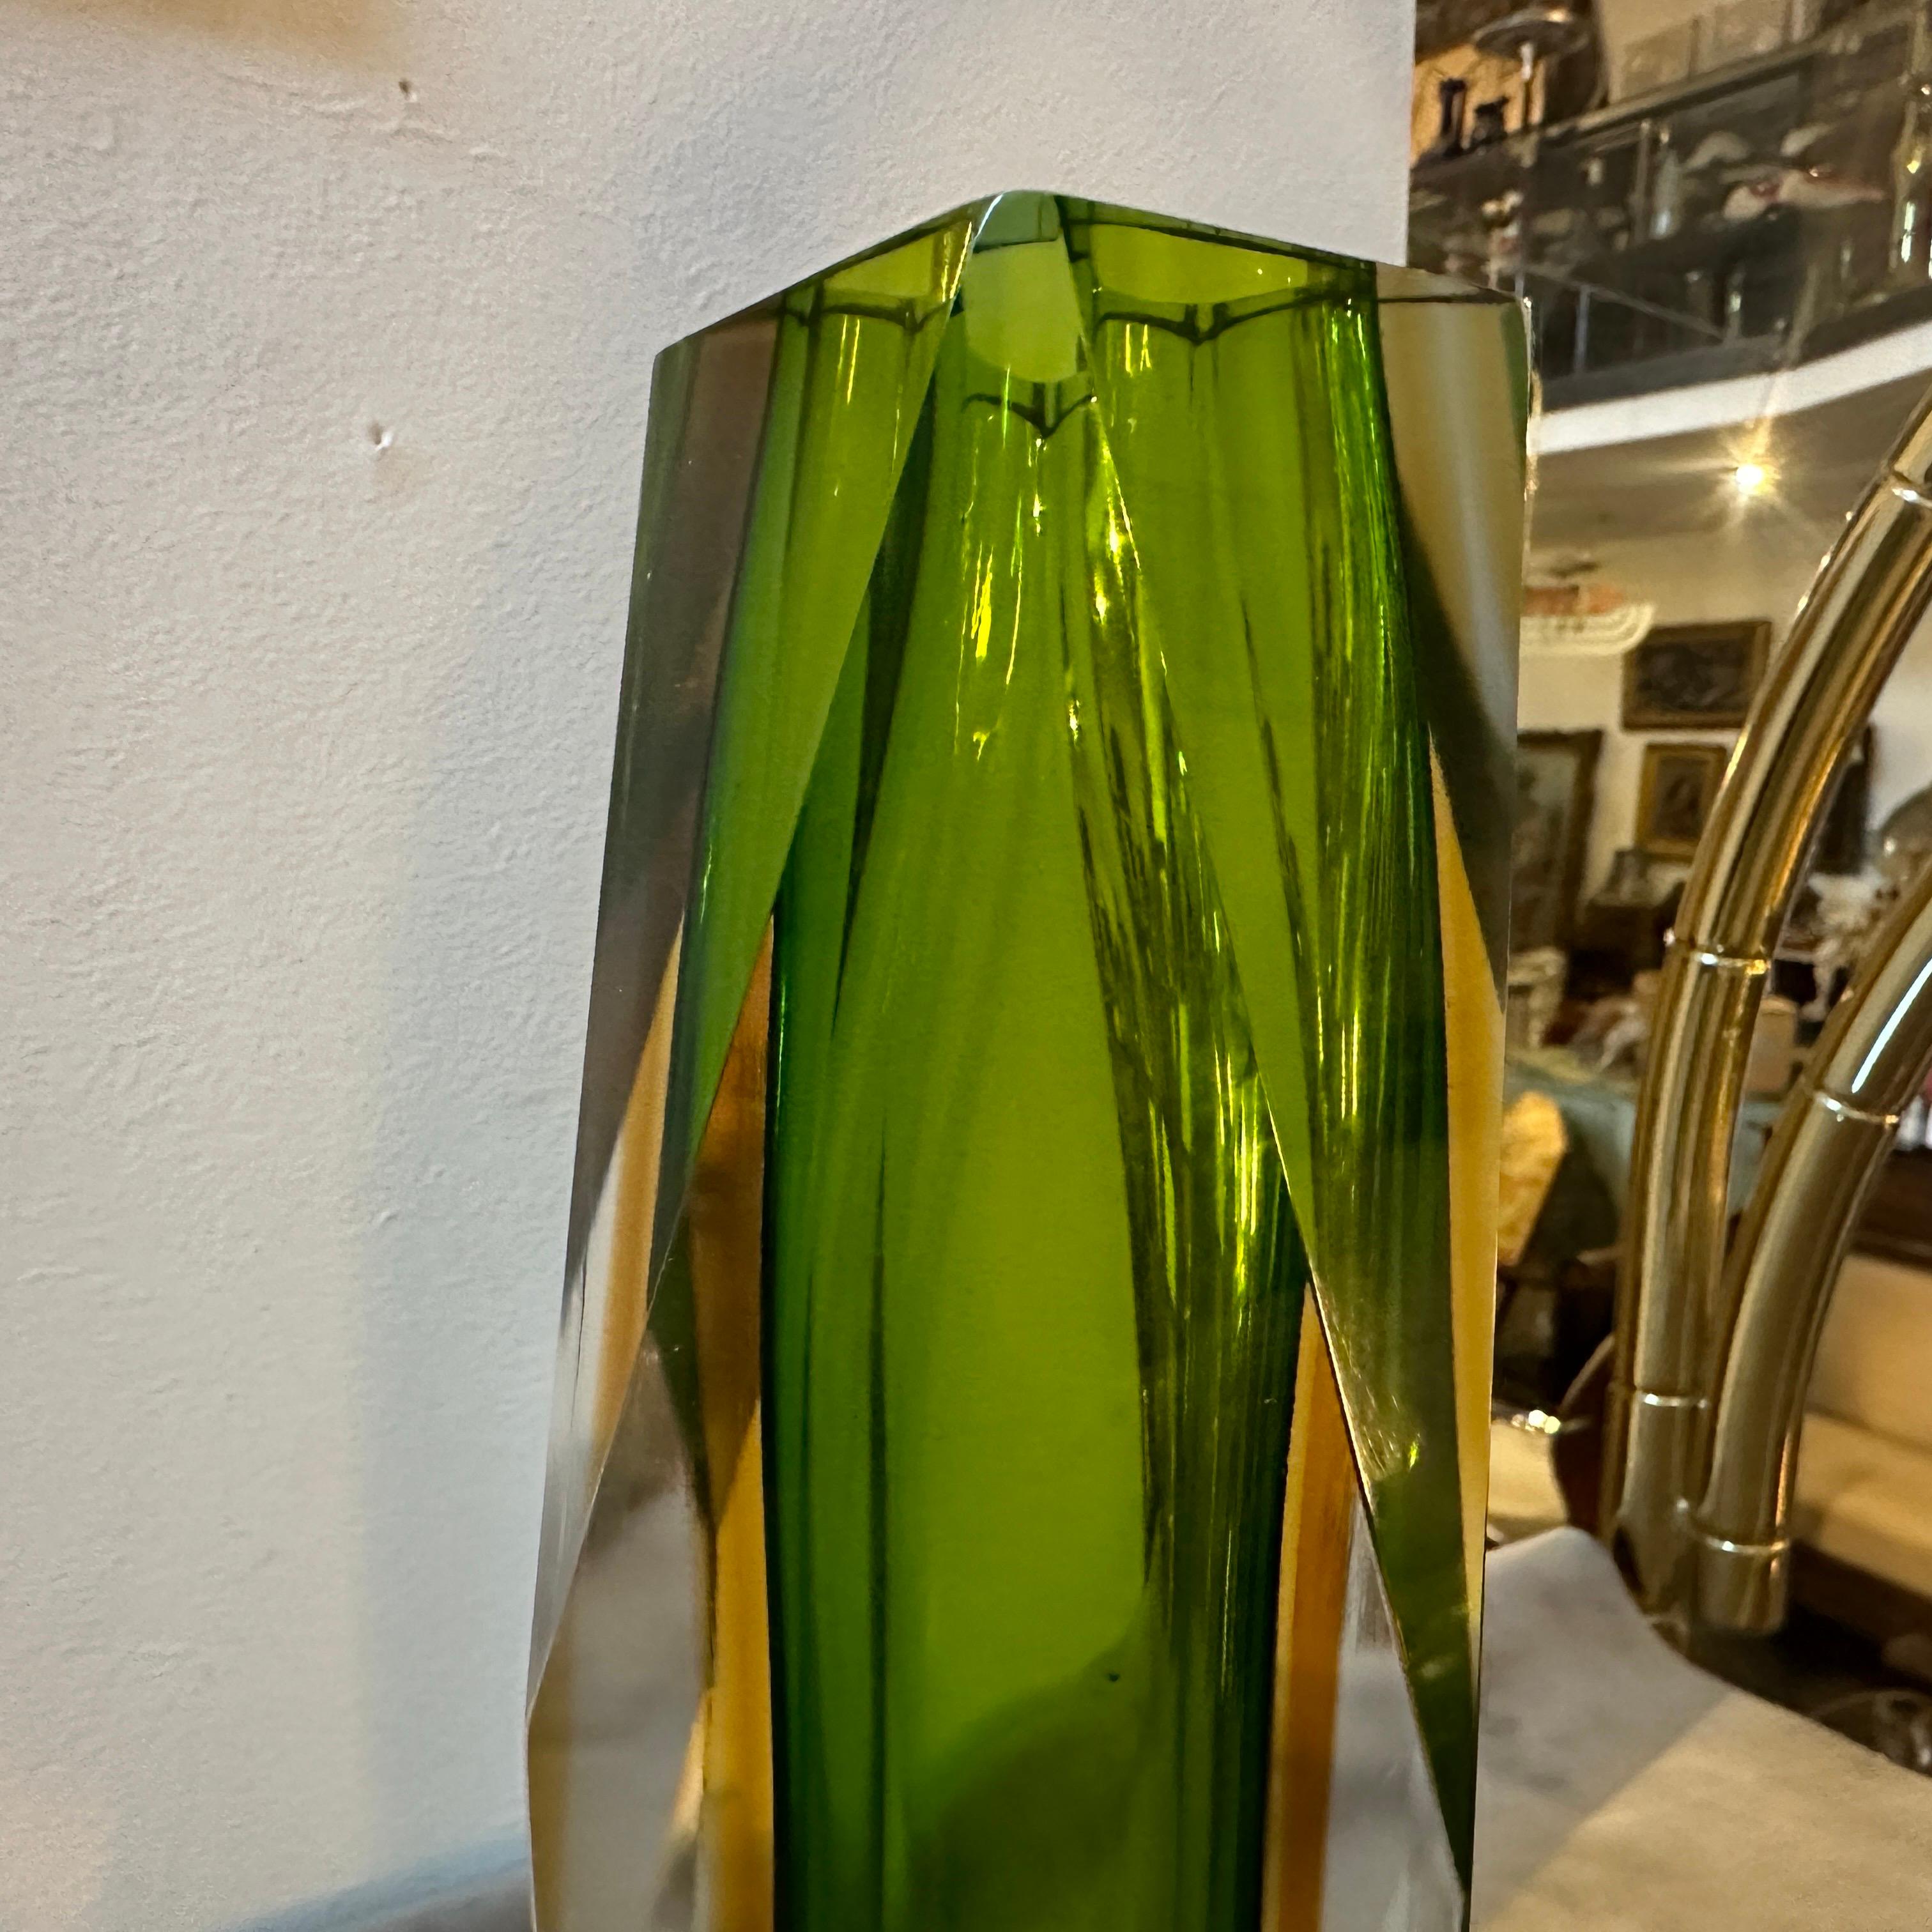 1960s Mid-Century Modern Green and Yellow Faceted Sommerso Murano Glass Vase For Sale 3